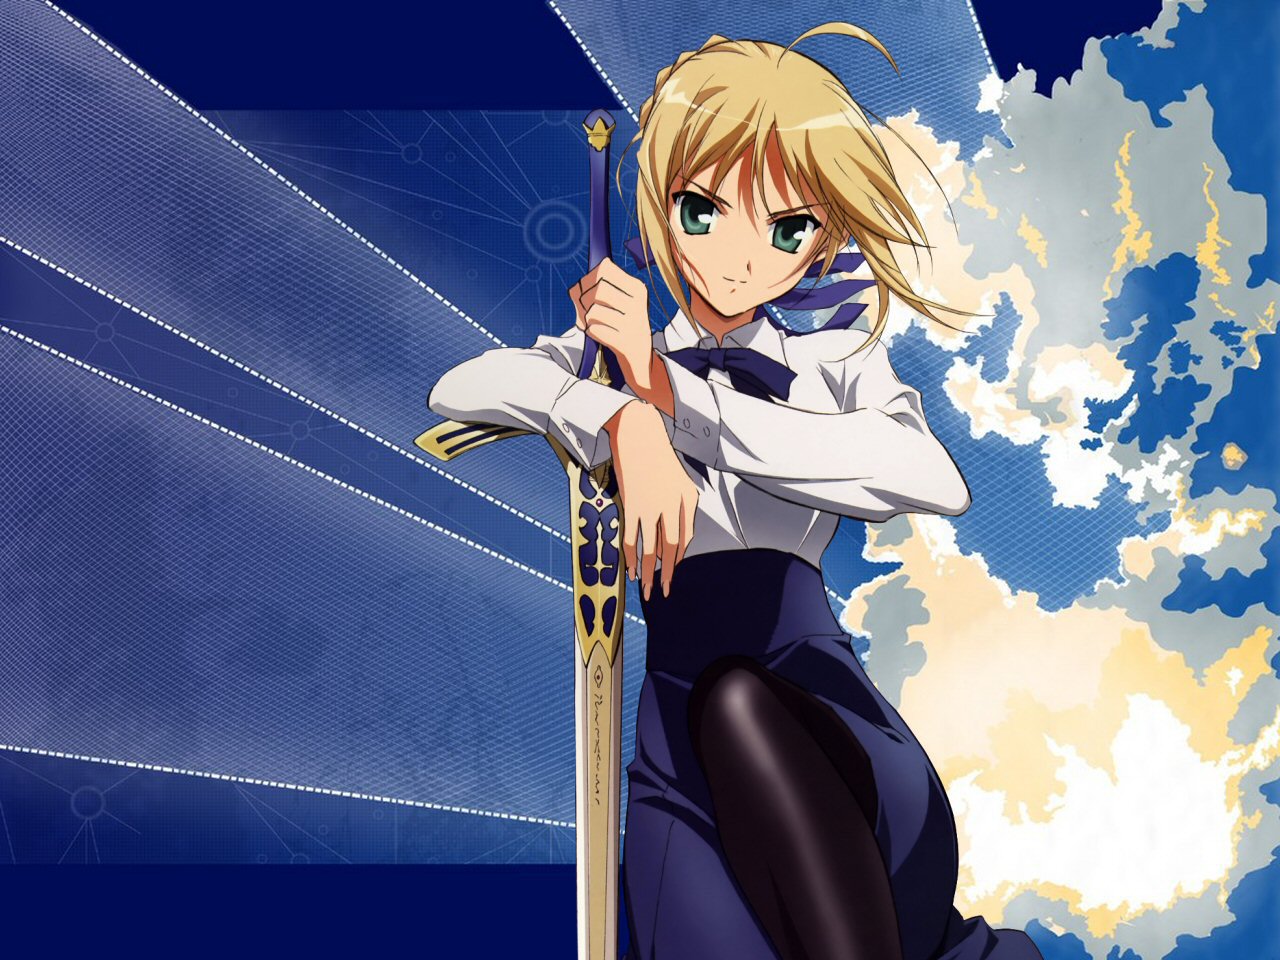 Fate Stay Night Image Saber HD Wallpaper And Background Photos